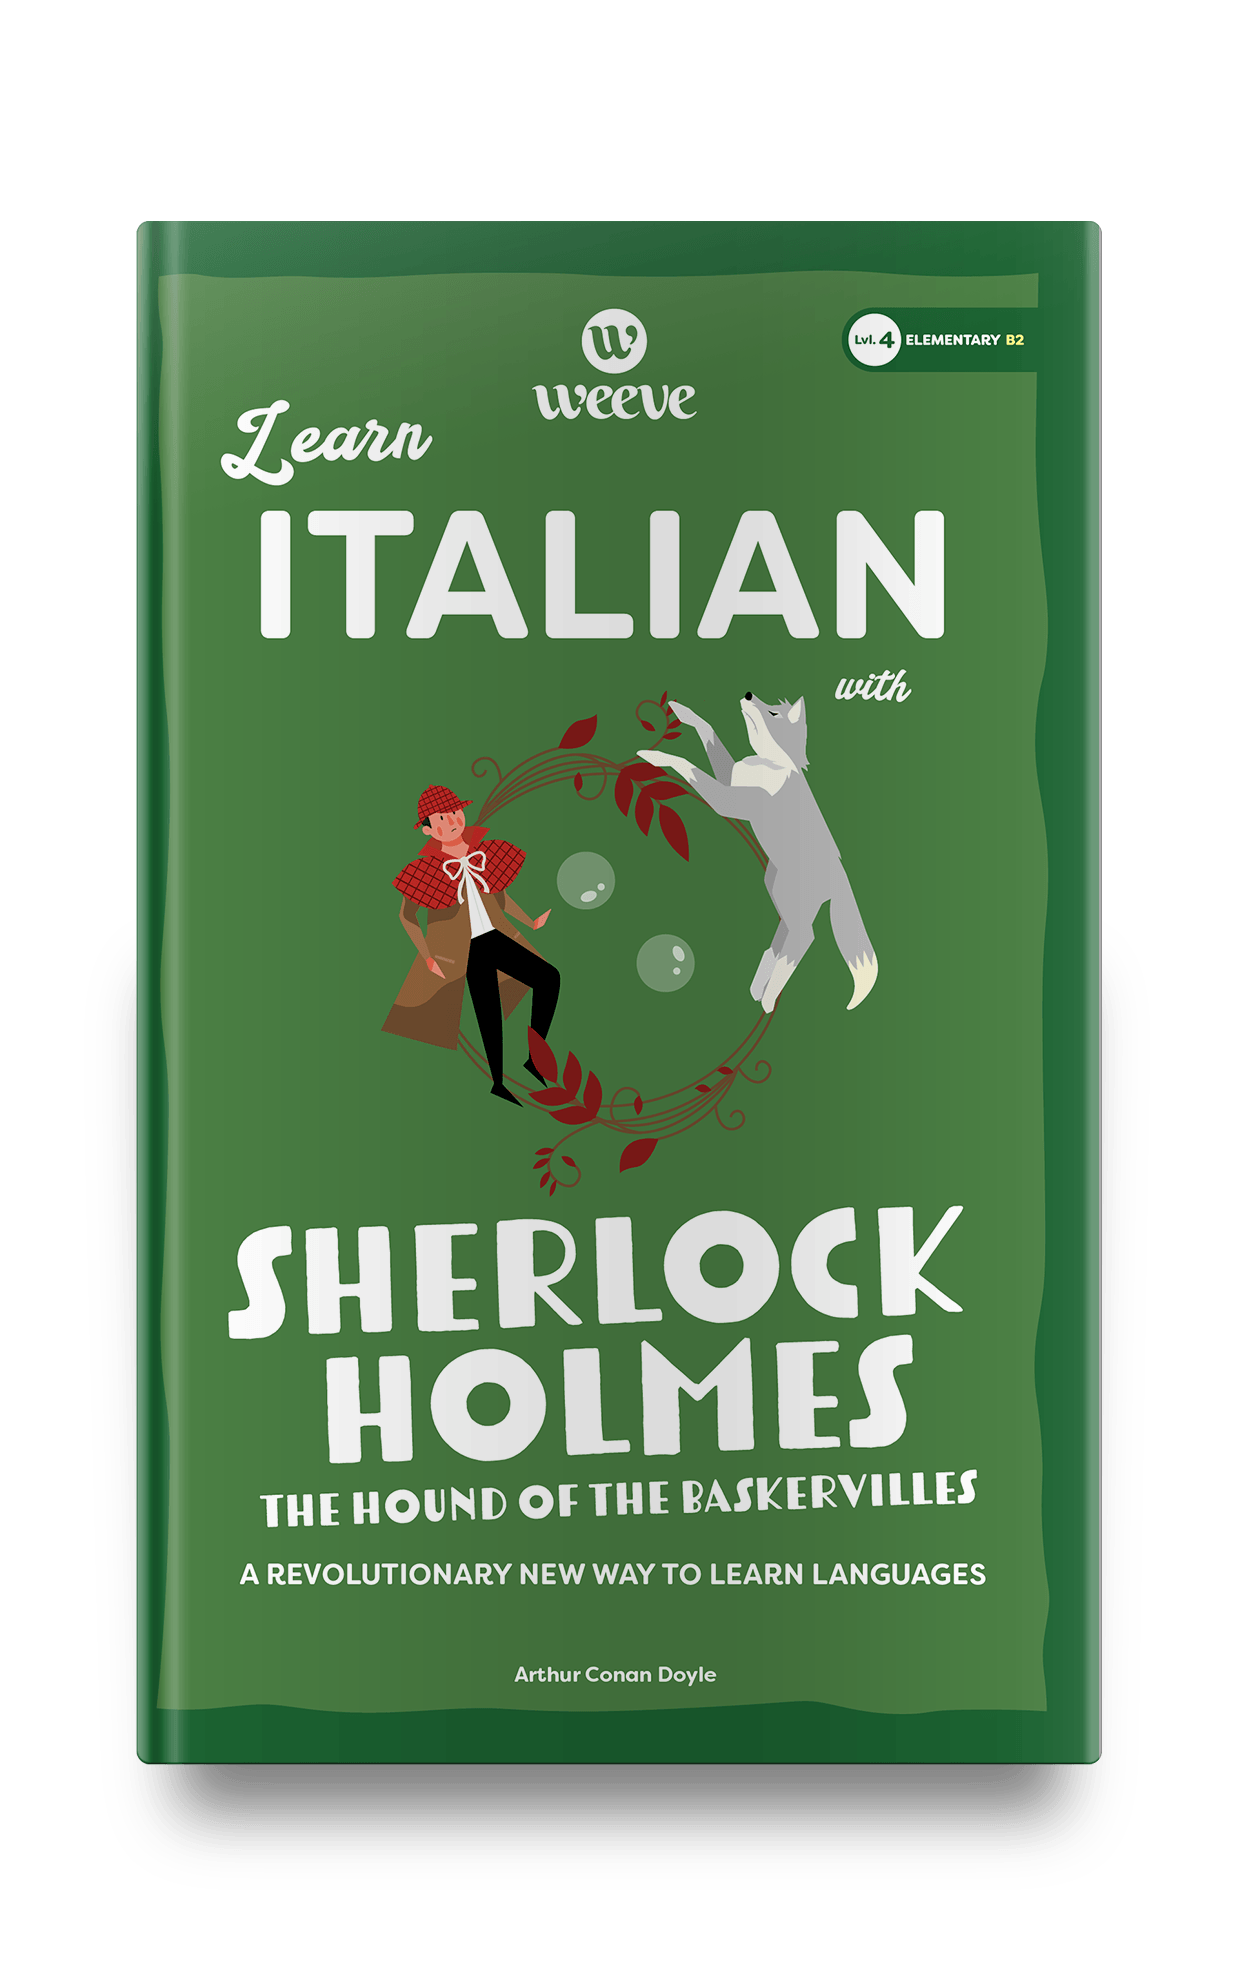 Learn Italian with Sherlock Holmes The Hound of the Baskervilles - Weeve